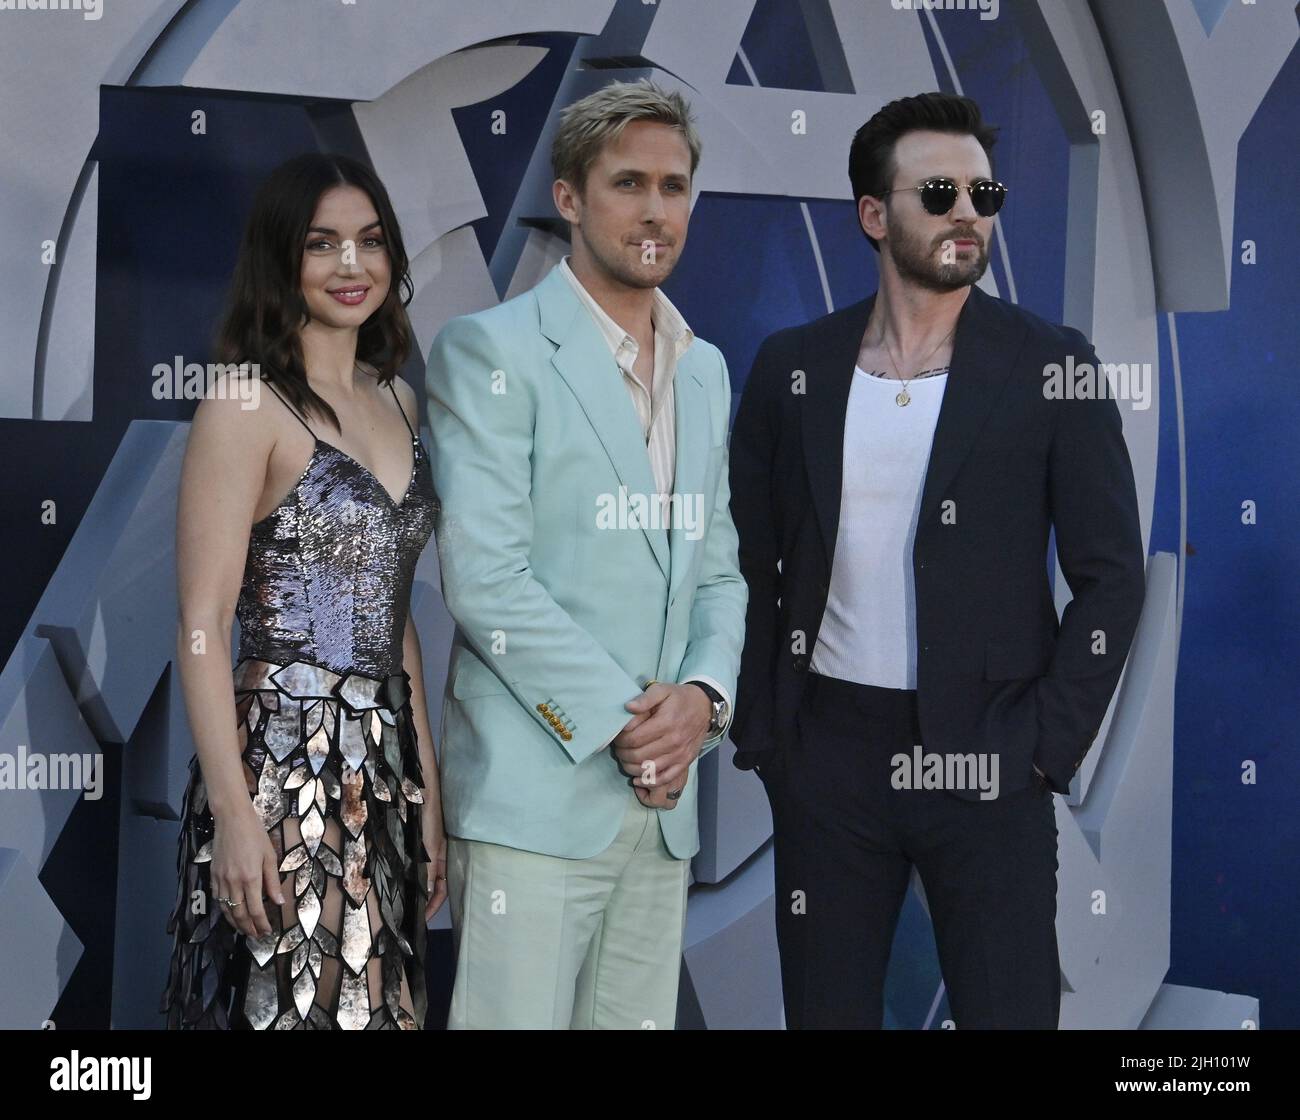 Los Angeles, United States. 14th July, 2022. Cast members Ana de Armas, Ryan Gosling and Chris Evans (L-R) attend Netflix's premiere of the motion picture drama "The Gray Man" at the TCL Chinese Theatre in the Hollywood section of Los Angeles on Wednesday, July 13, 2022. Storyline: When the CIA's top asset, his identity known to no one uncovers agency secrets, he triggers a global hunt by assassins set loose by his ex-colleague. Photo by Jim Ruymen/UPI Credit: UPI/Alamy Live News Stock Photo